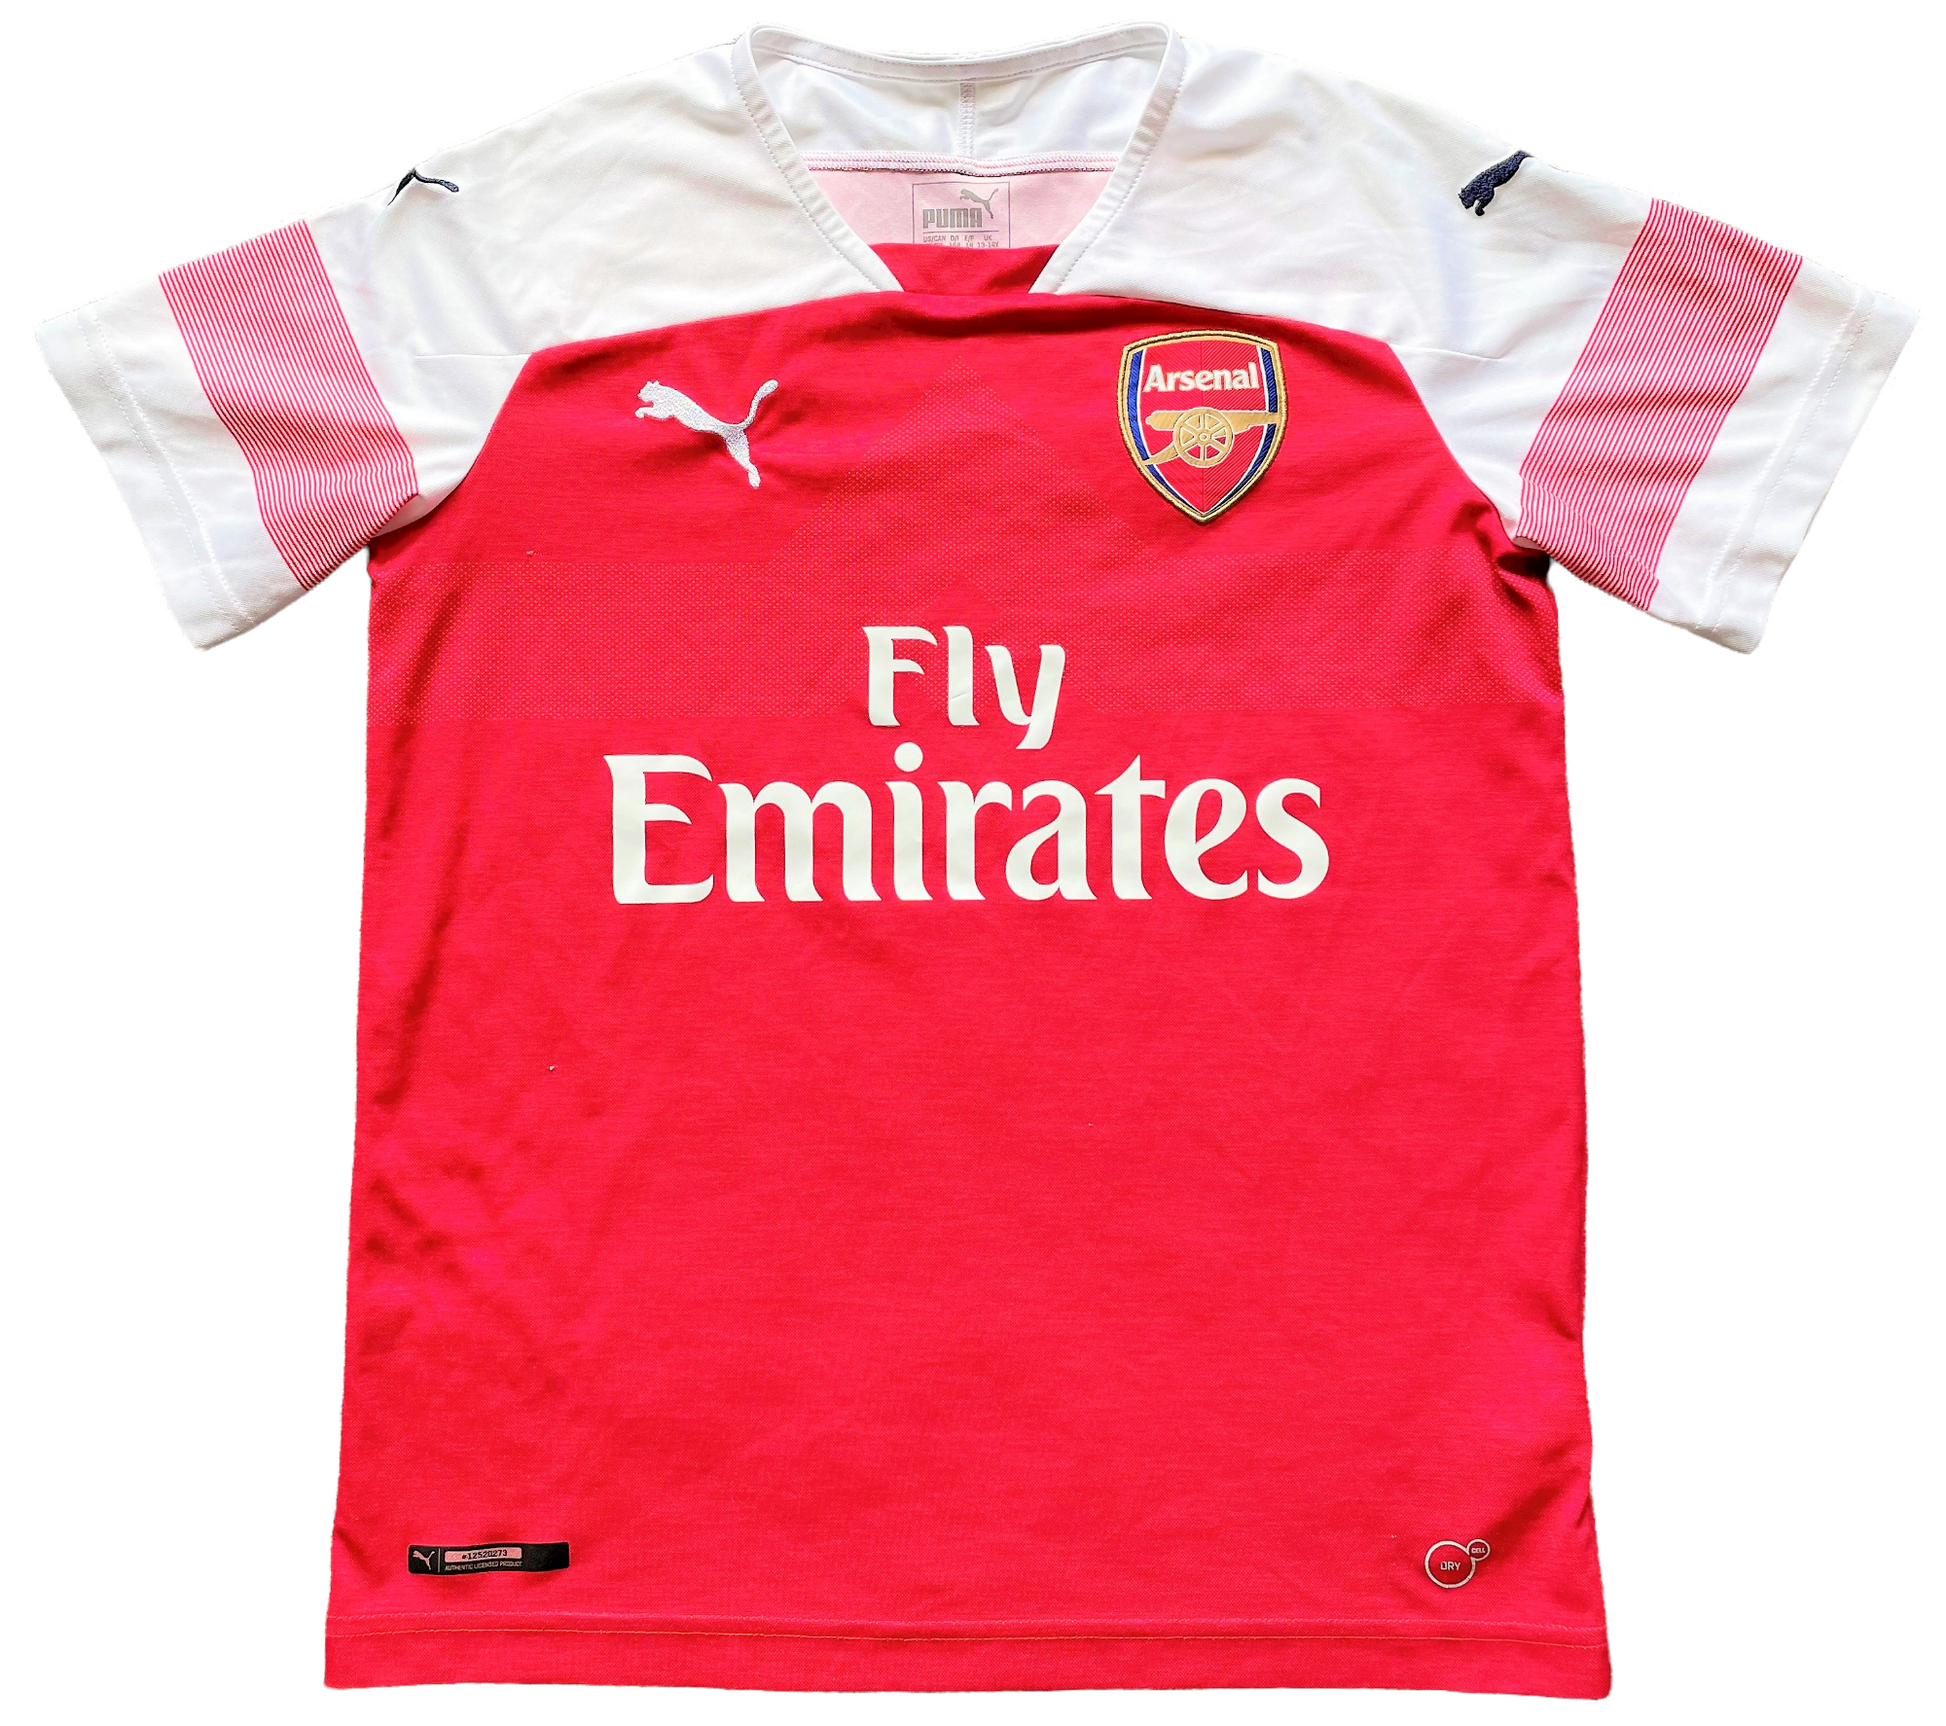 2018-19 Arsenal Home Shirt (good) Youths 13-14 years